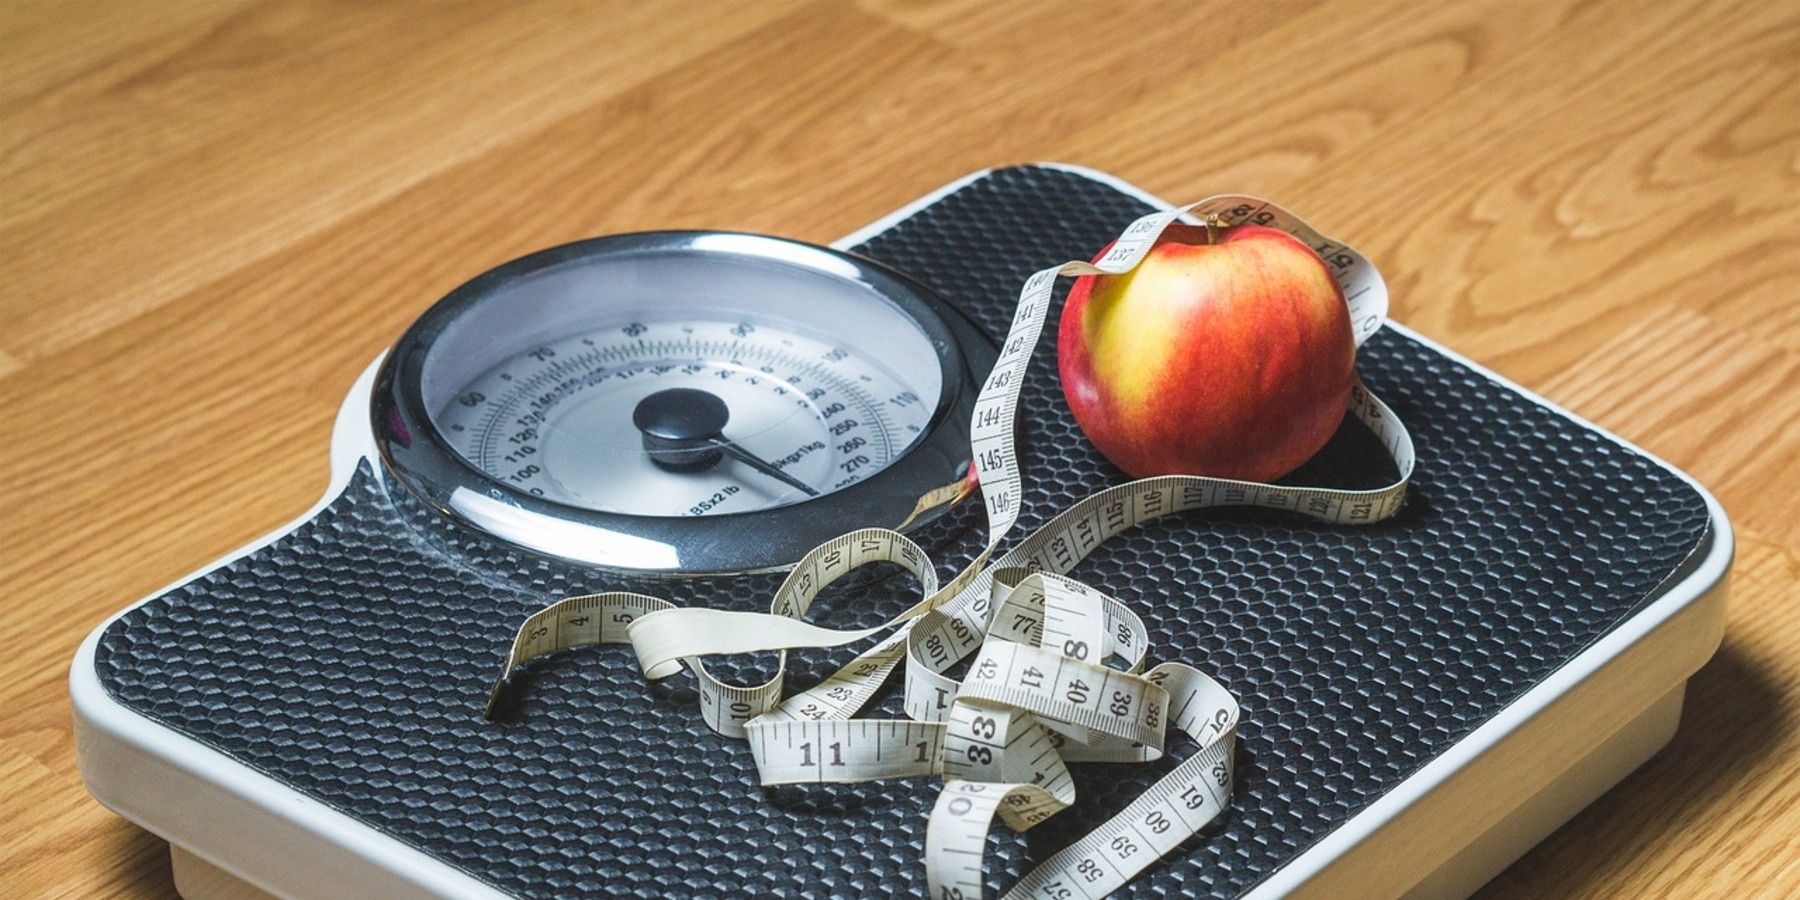 Scale with measuring tape and an apple, and the person who owns it might be losing weight.